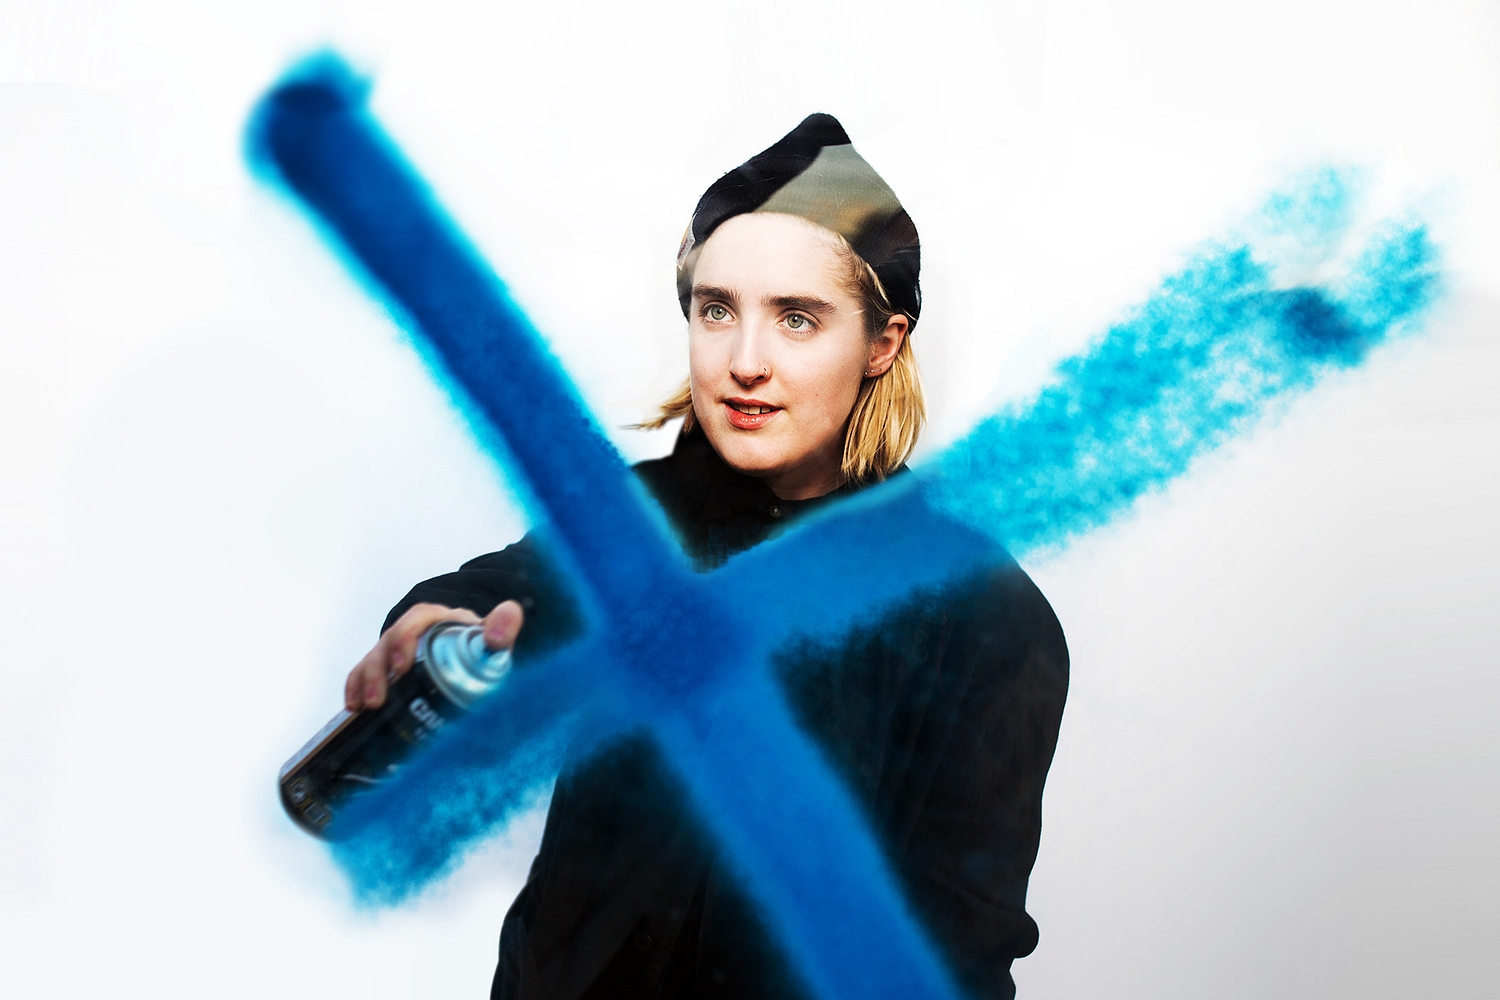 It's a Shura thing: "My boobs, licensed to Polydor"